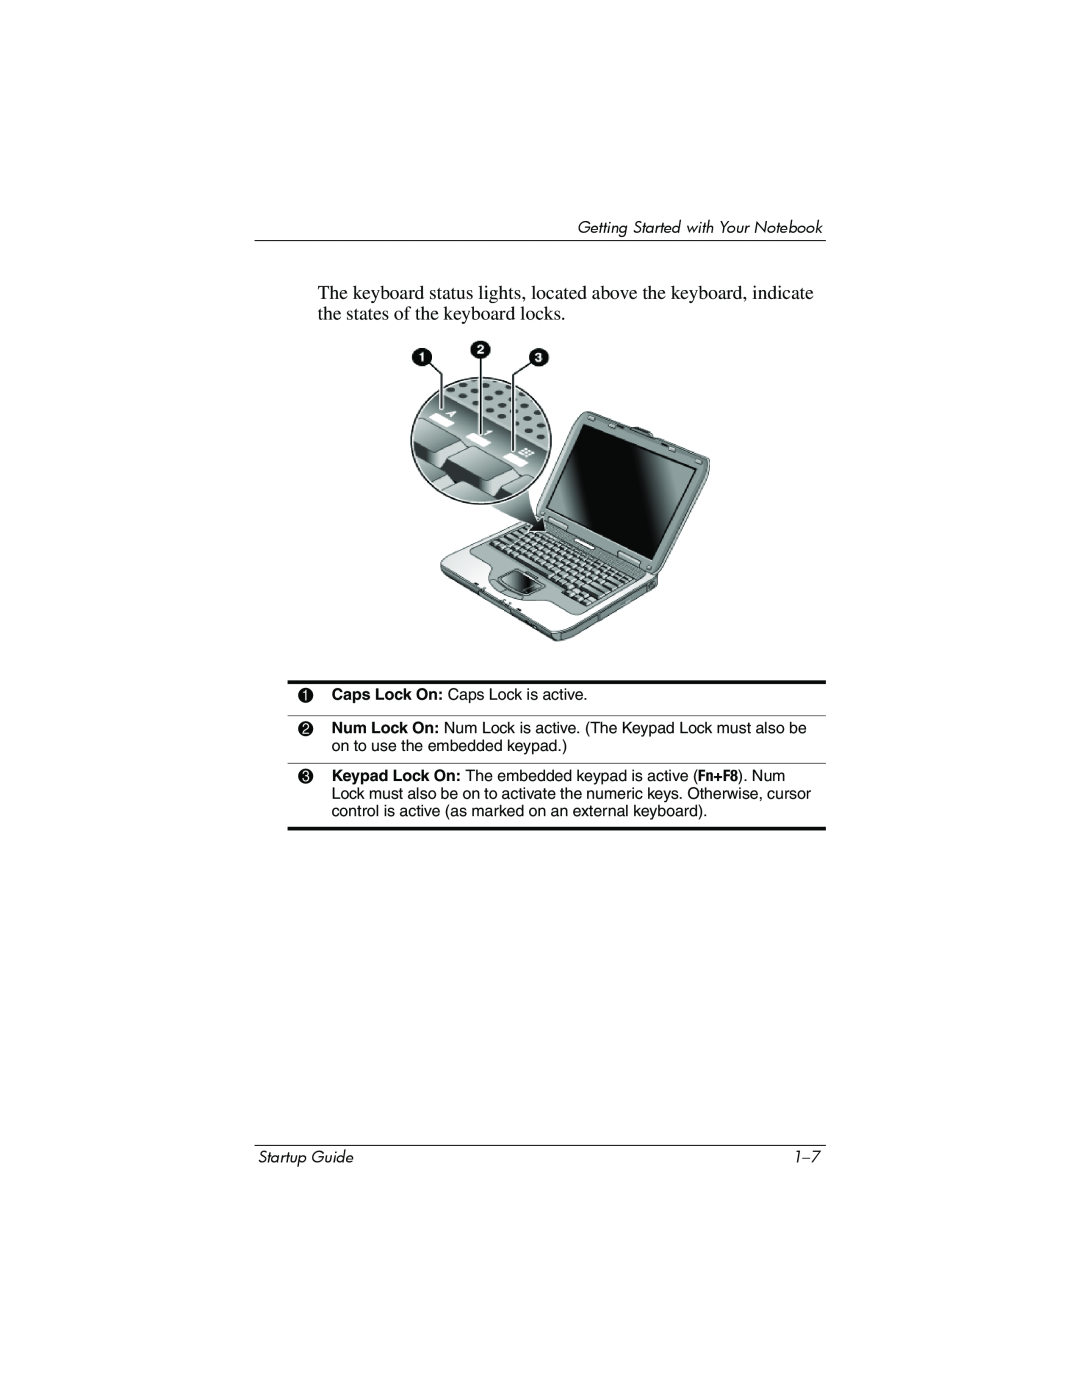 Compaq Personal Computer manual Getting Started with Your Notebook, Caps Lock On Caps Lock is active, Startup Guide 